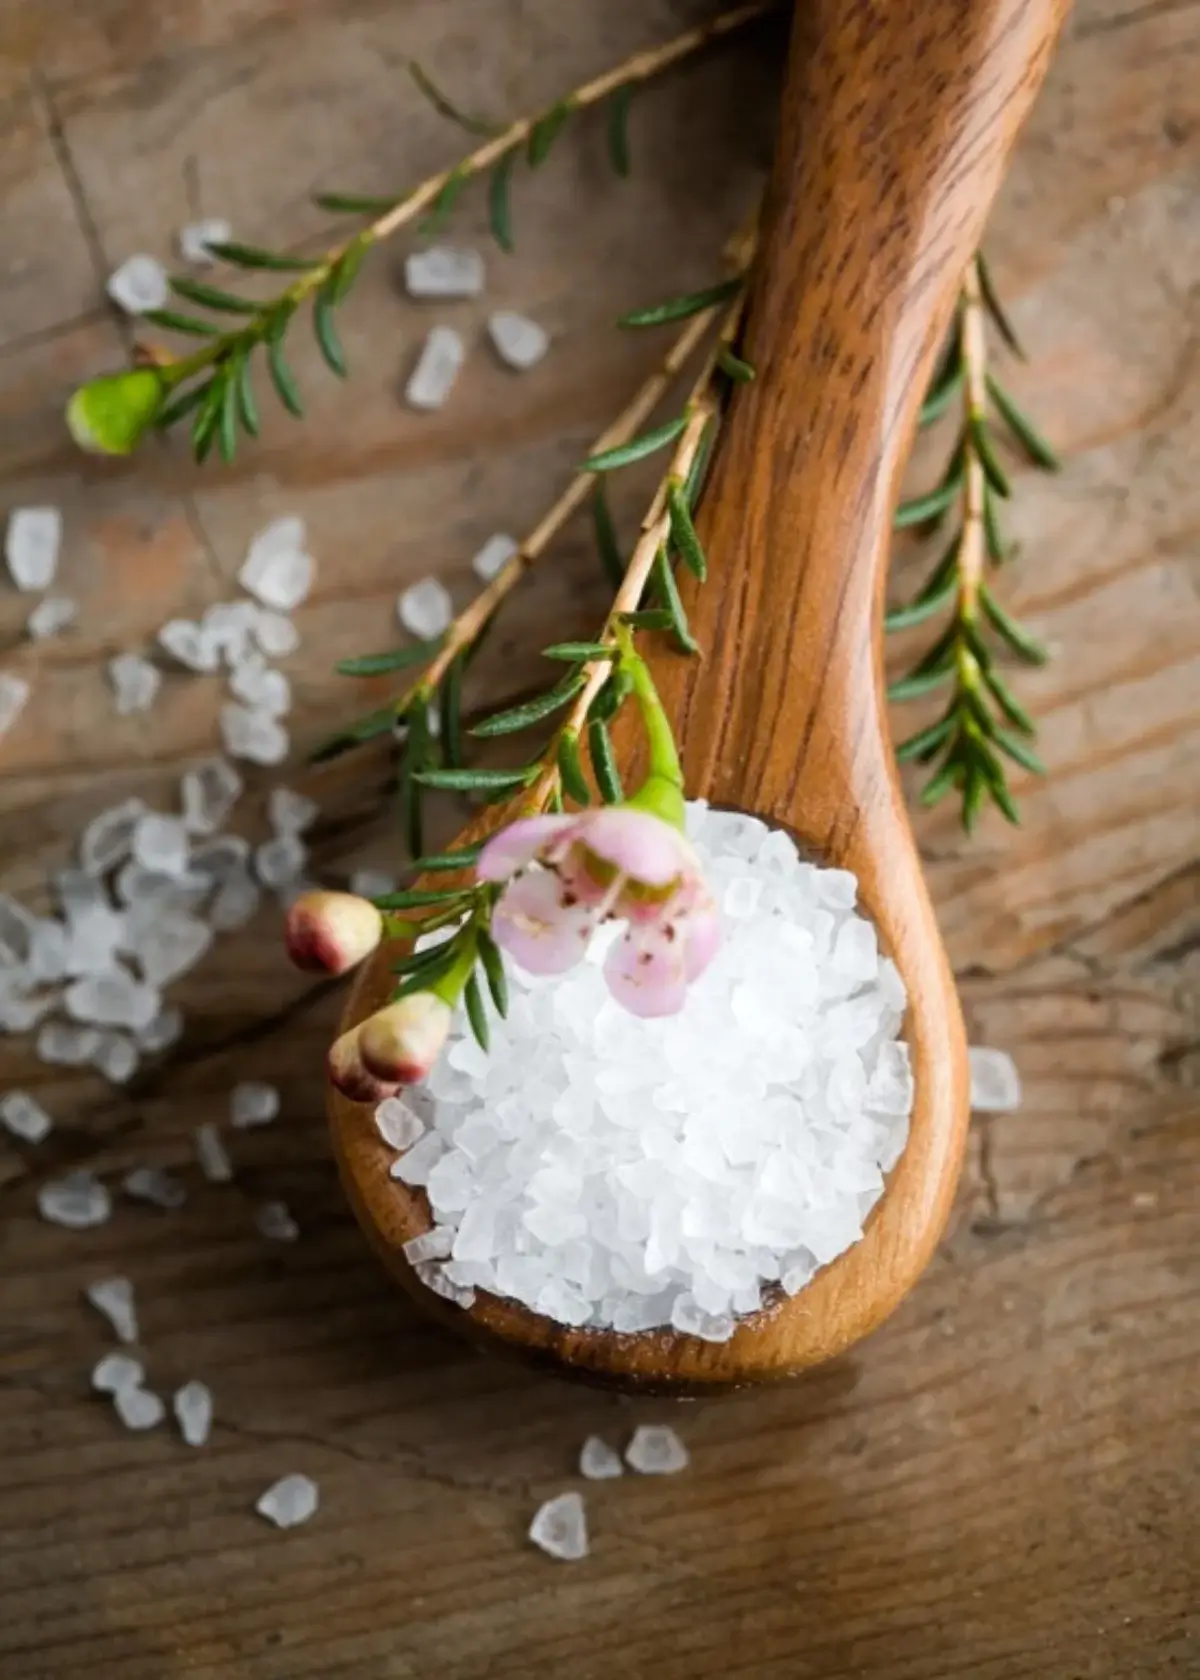 What are the benefits of using Epsom salt?